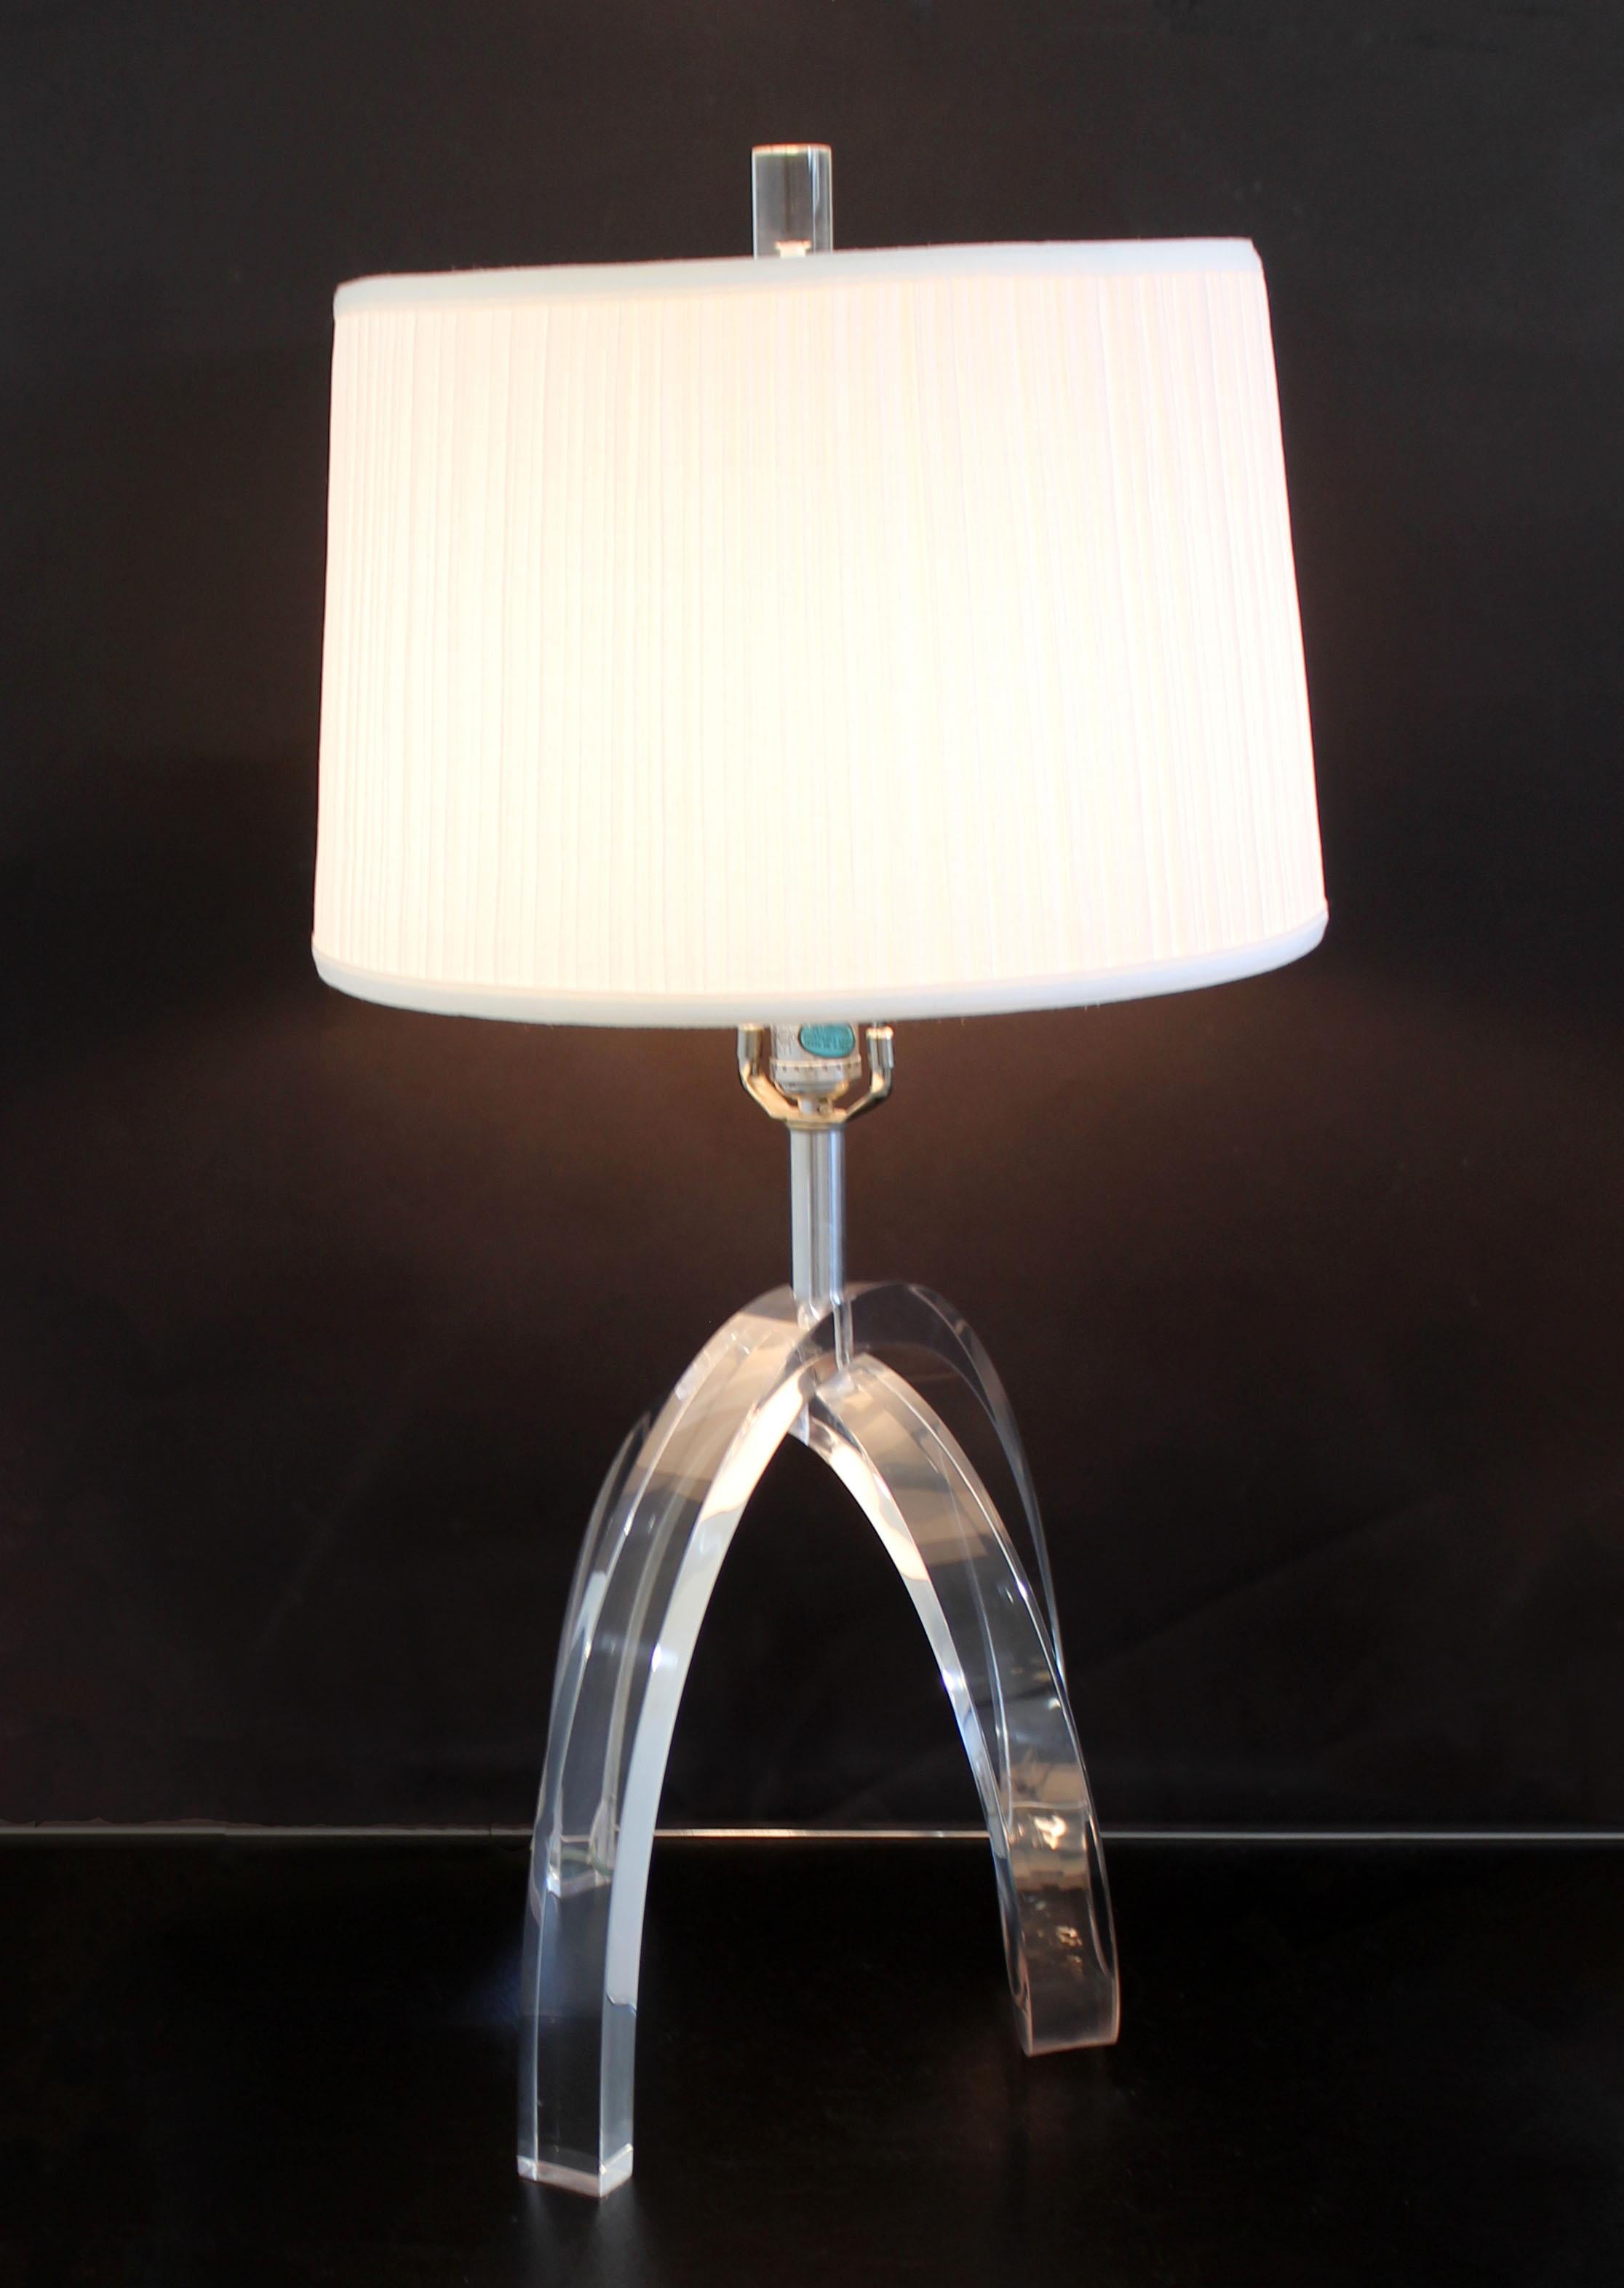 For your consideration is a fabulous table lamp, made of sculptural Lucite in a pretzel shape, with its original finial, by Herb Ritts for Astrolite, circa 1970s. In excellent condition. The dimensions of the lamp are 13